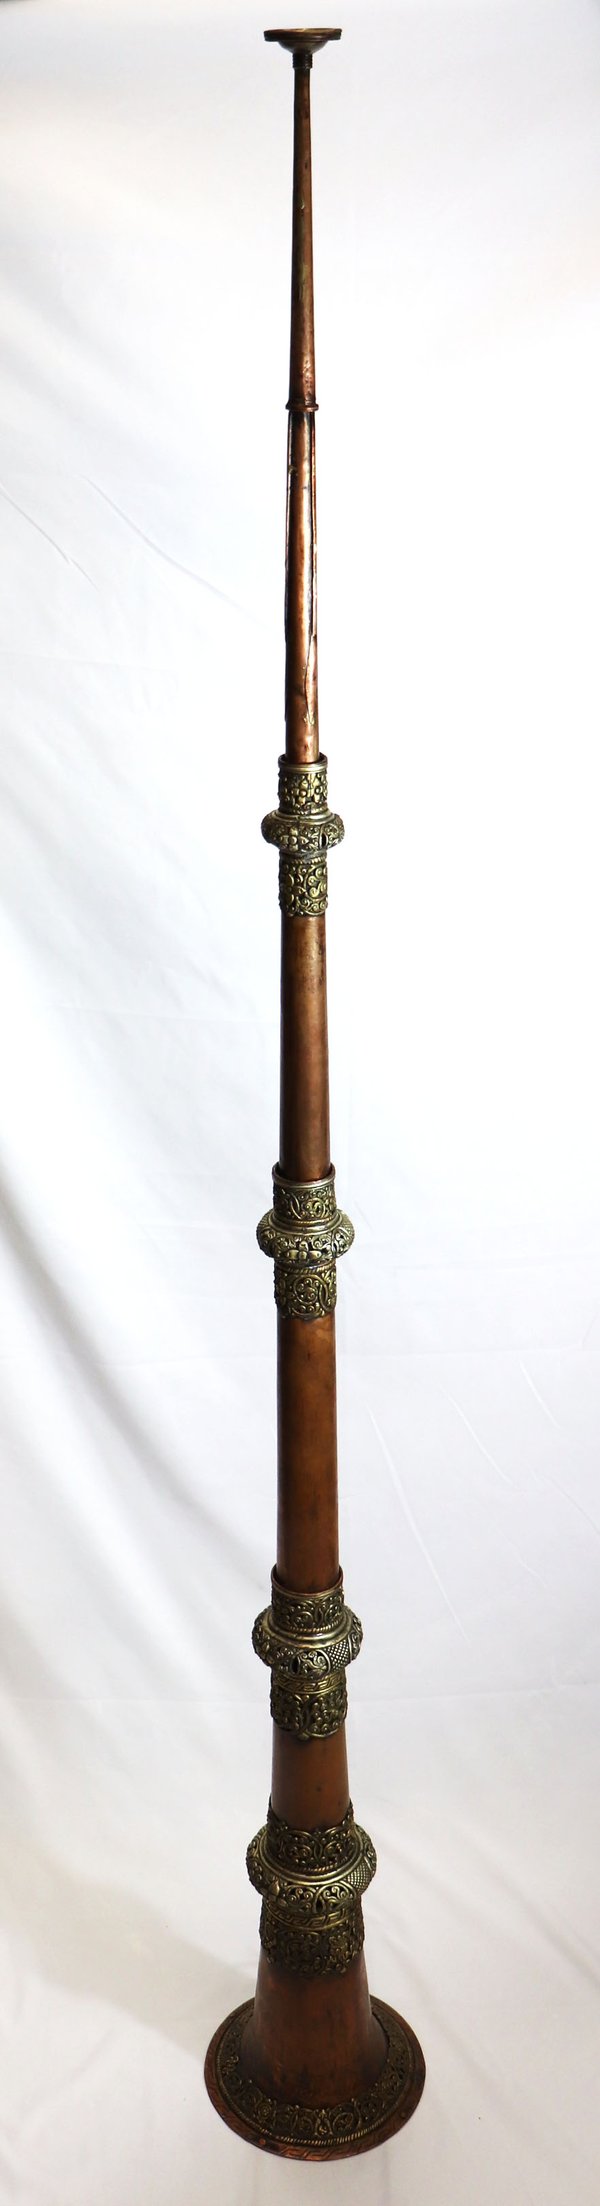 Image of Vintage, Hand-Made Tibetan Ceremonial Brass & Copper Expandable Horn, 69 Inches Tall